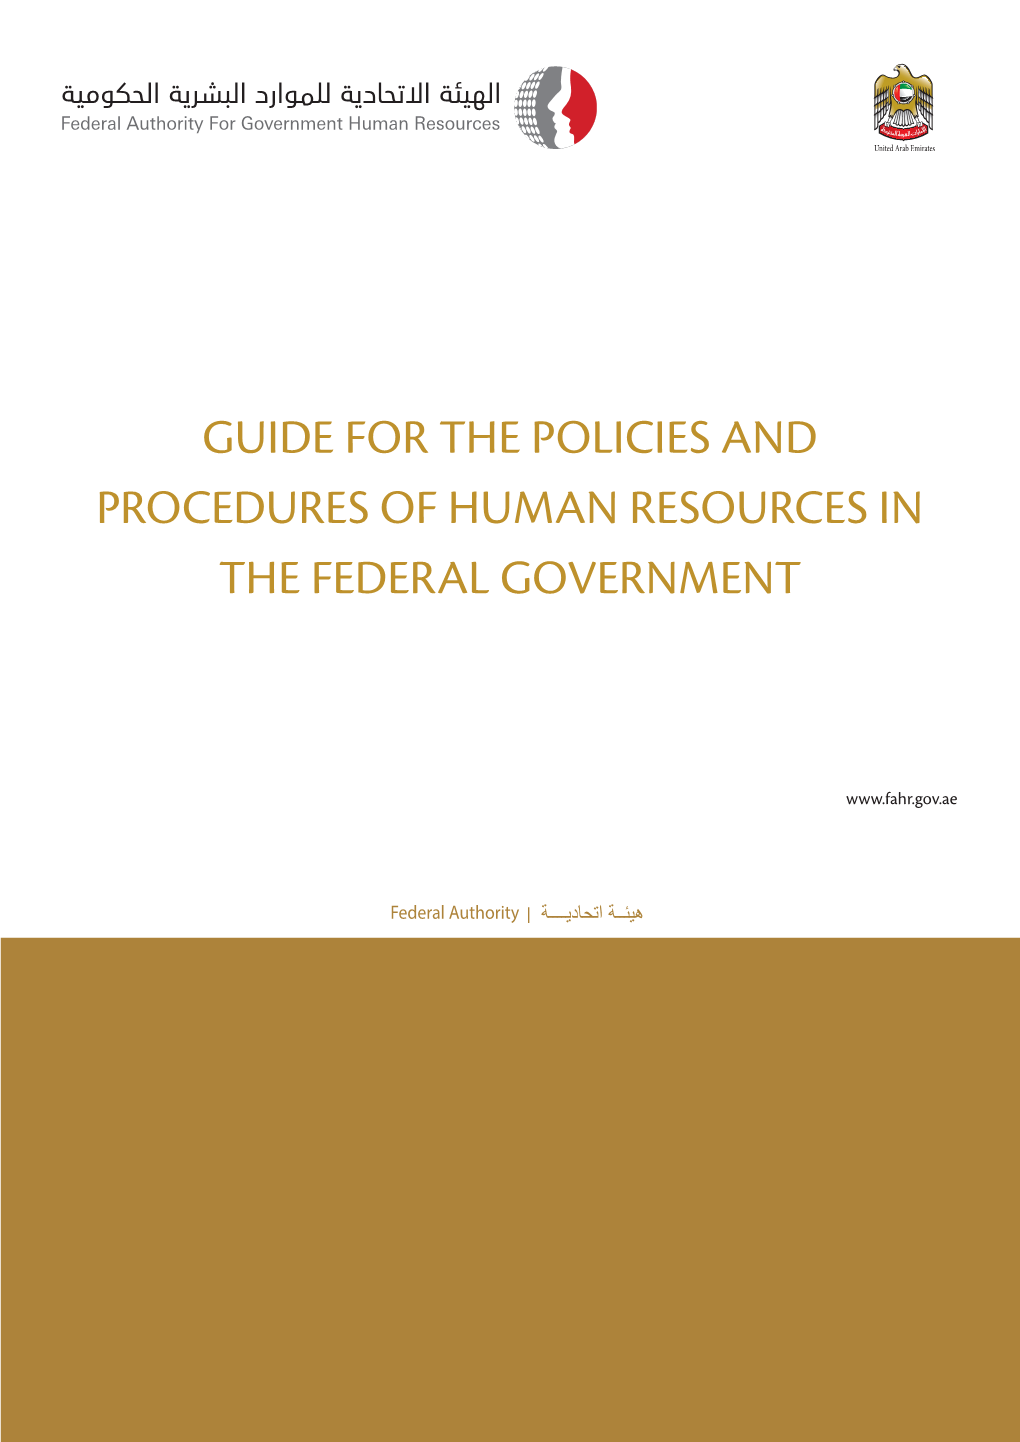 Guide for the Policies and Procedures of Human Resources in the Federal Government